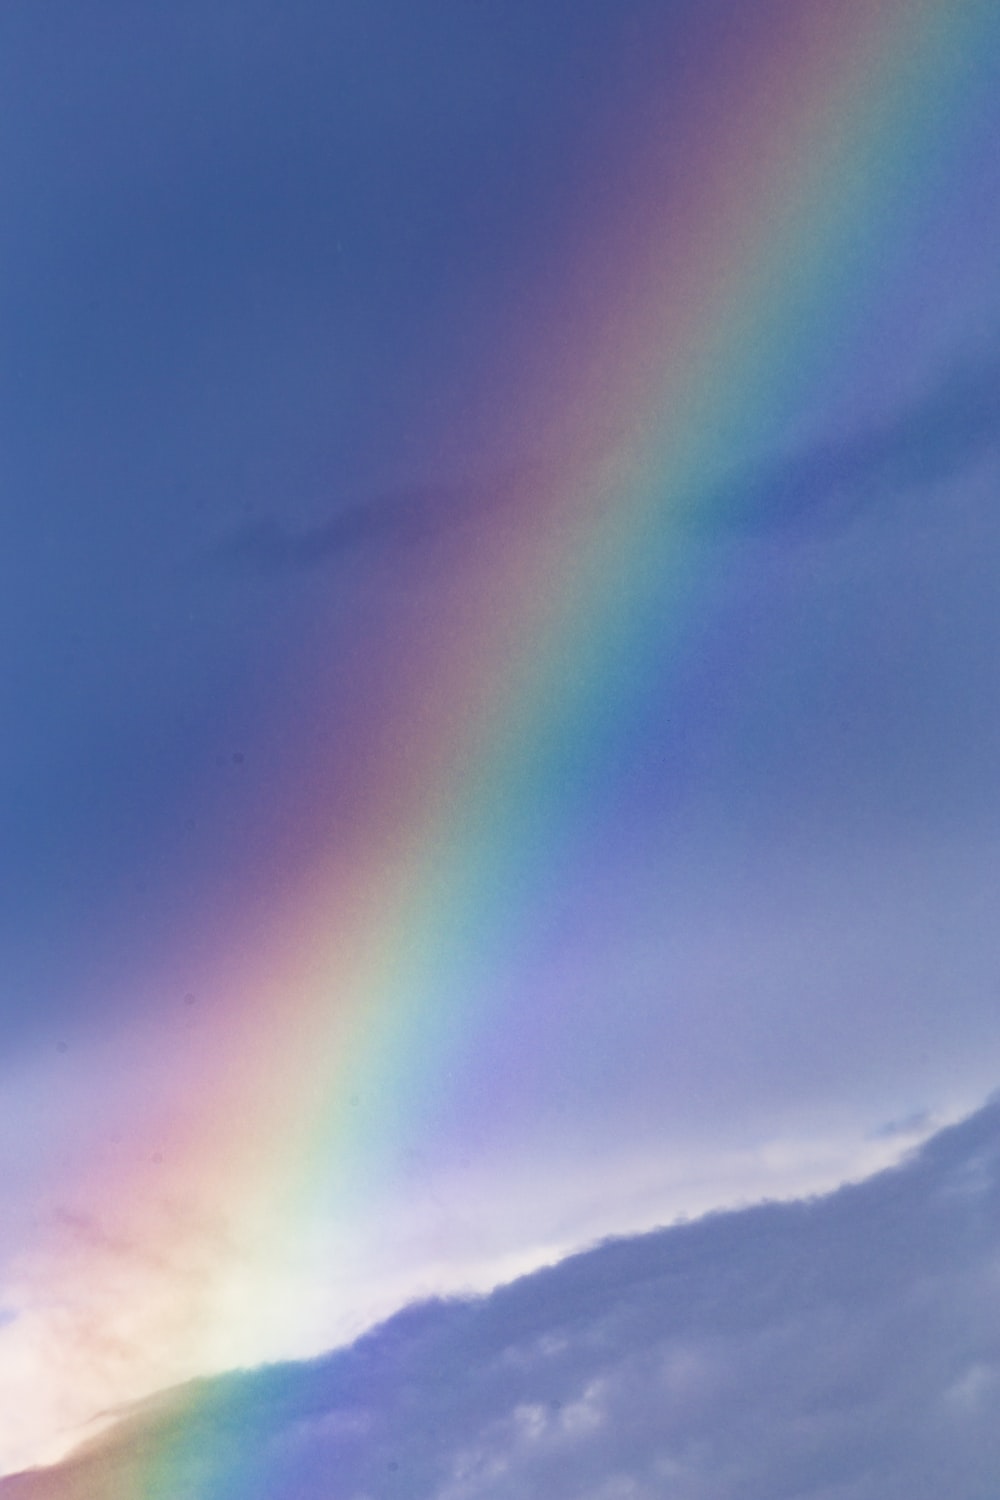 Sky Rainbow Picture. Download Free Image